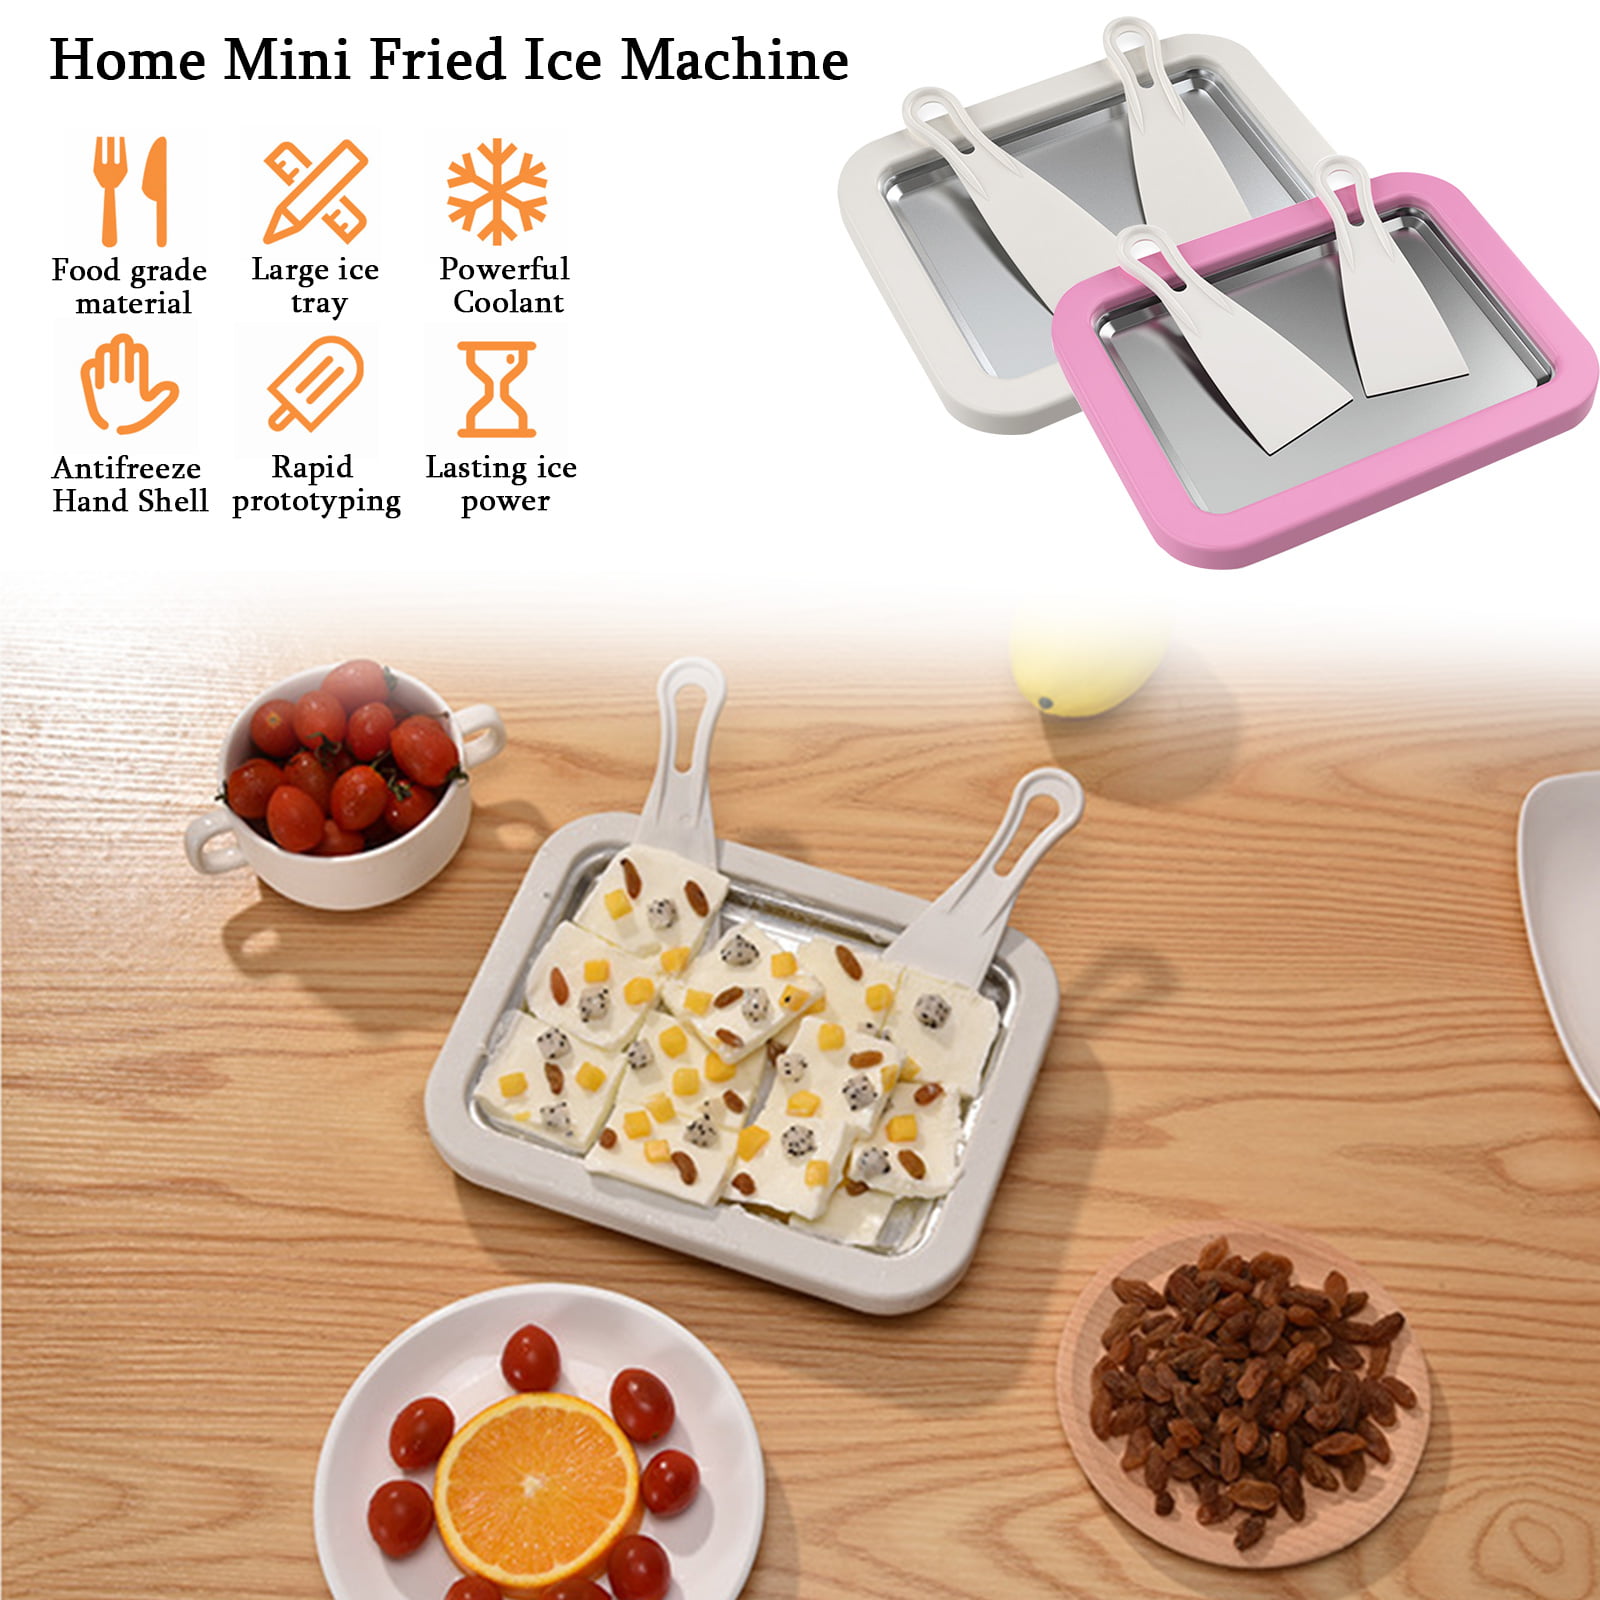 Instant Ice Cream Maker Pan with Rectangle Spade Rectangle Rolled Ice Cream Maker Fry Ice Cream Pan Tray for Healthy Homemade Scrambled Yogurt, 